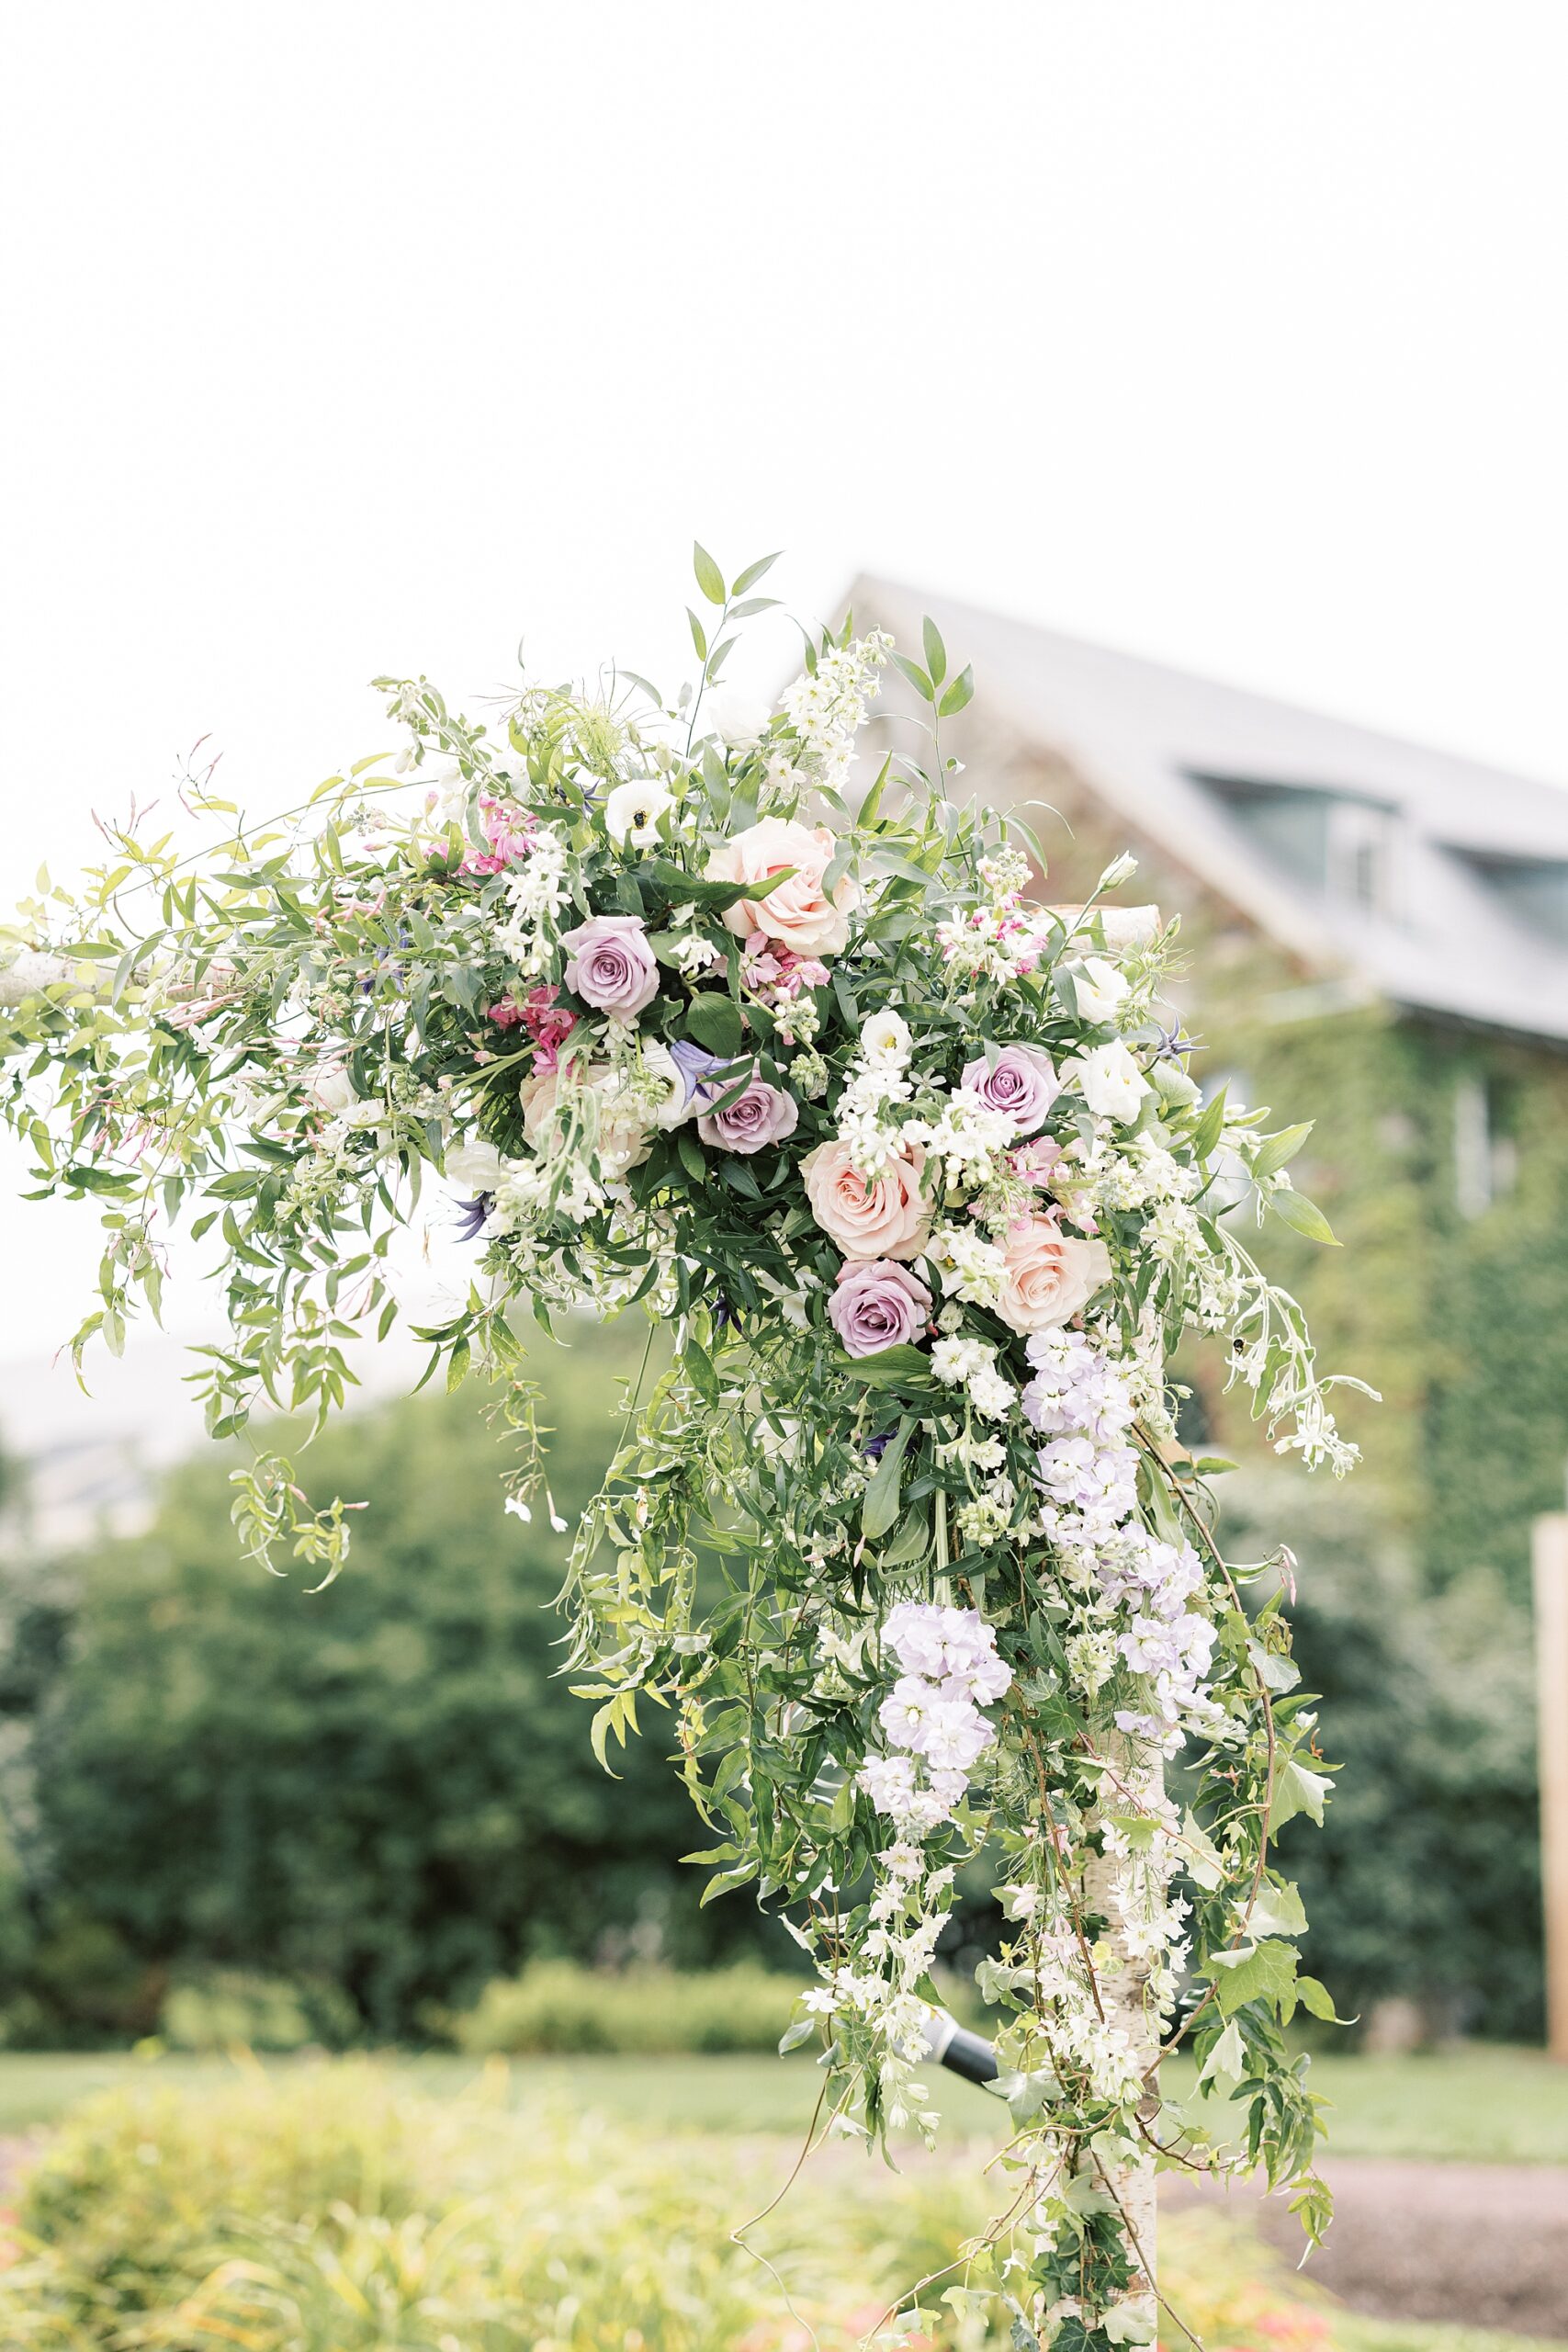 wedding ceremony with white and pink flowers on arbor 